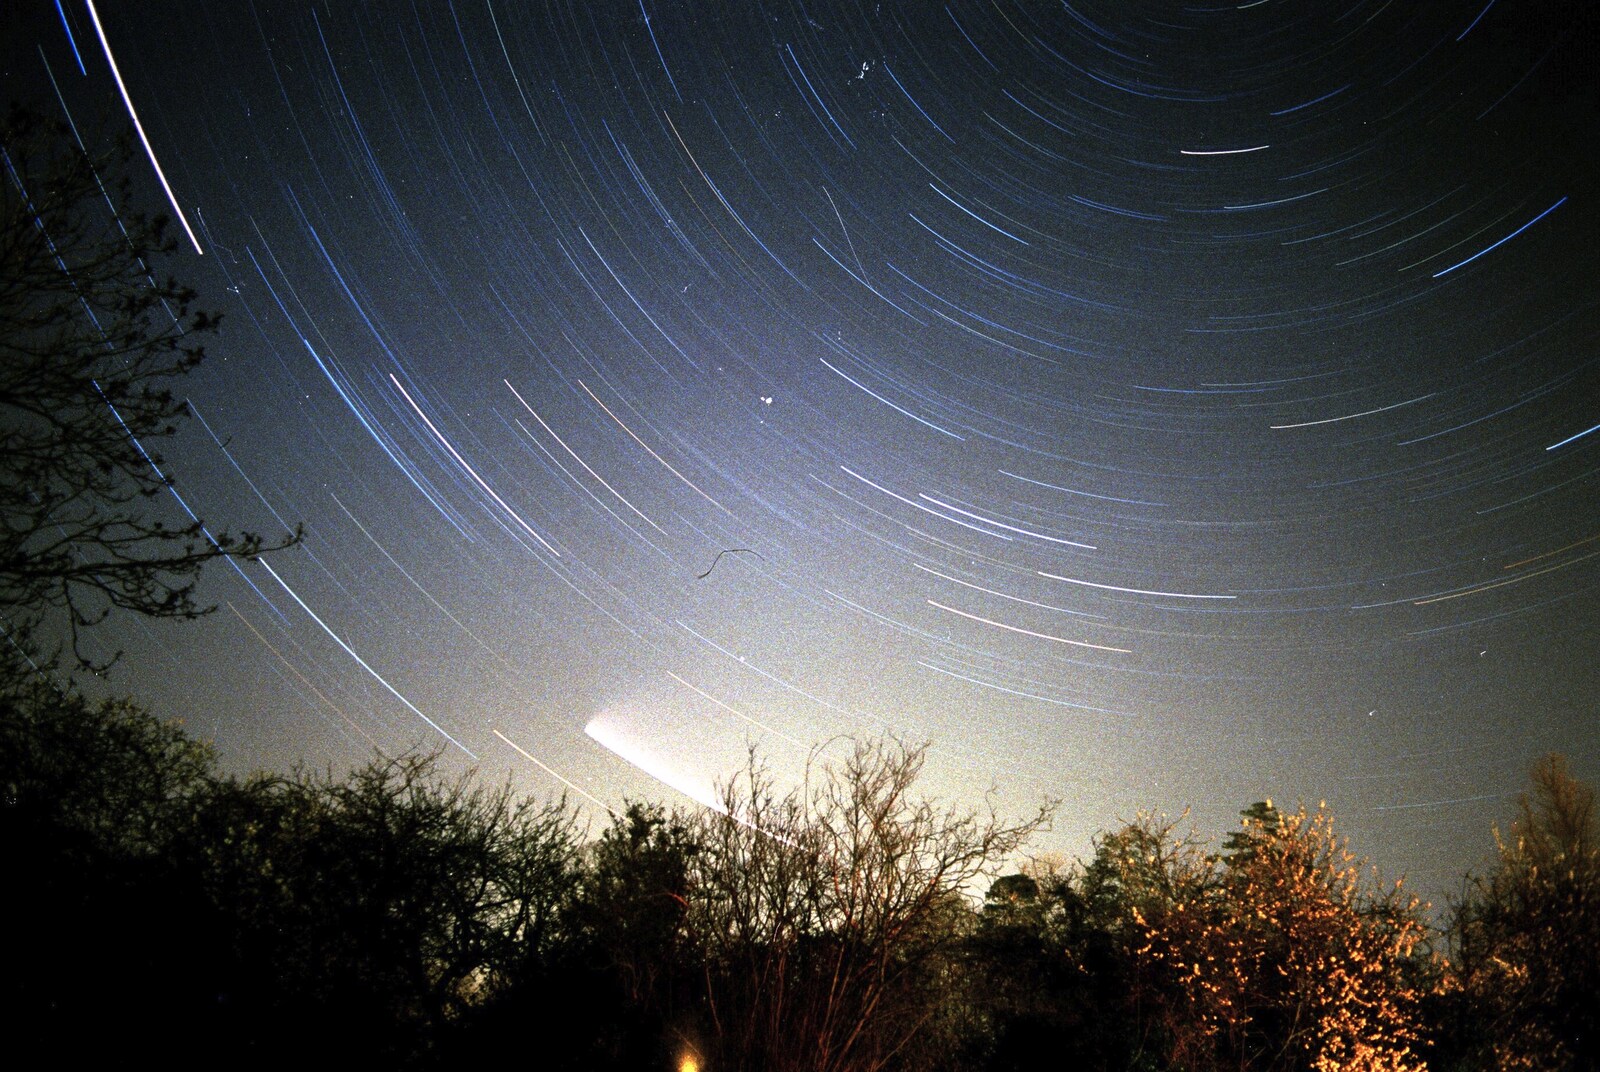 A star trail, width a smudge of comet from Hale-Bopp and Bedroom Demolition, Brome, Suffolk - 10th May 1997